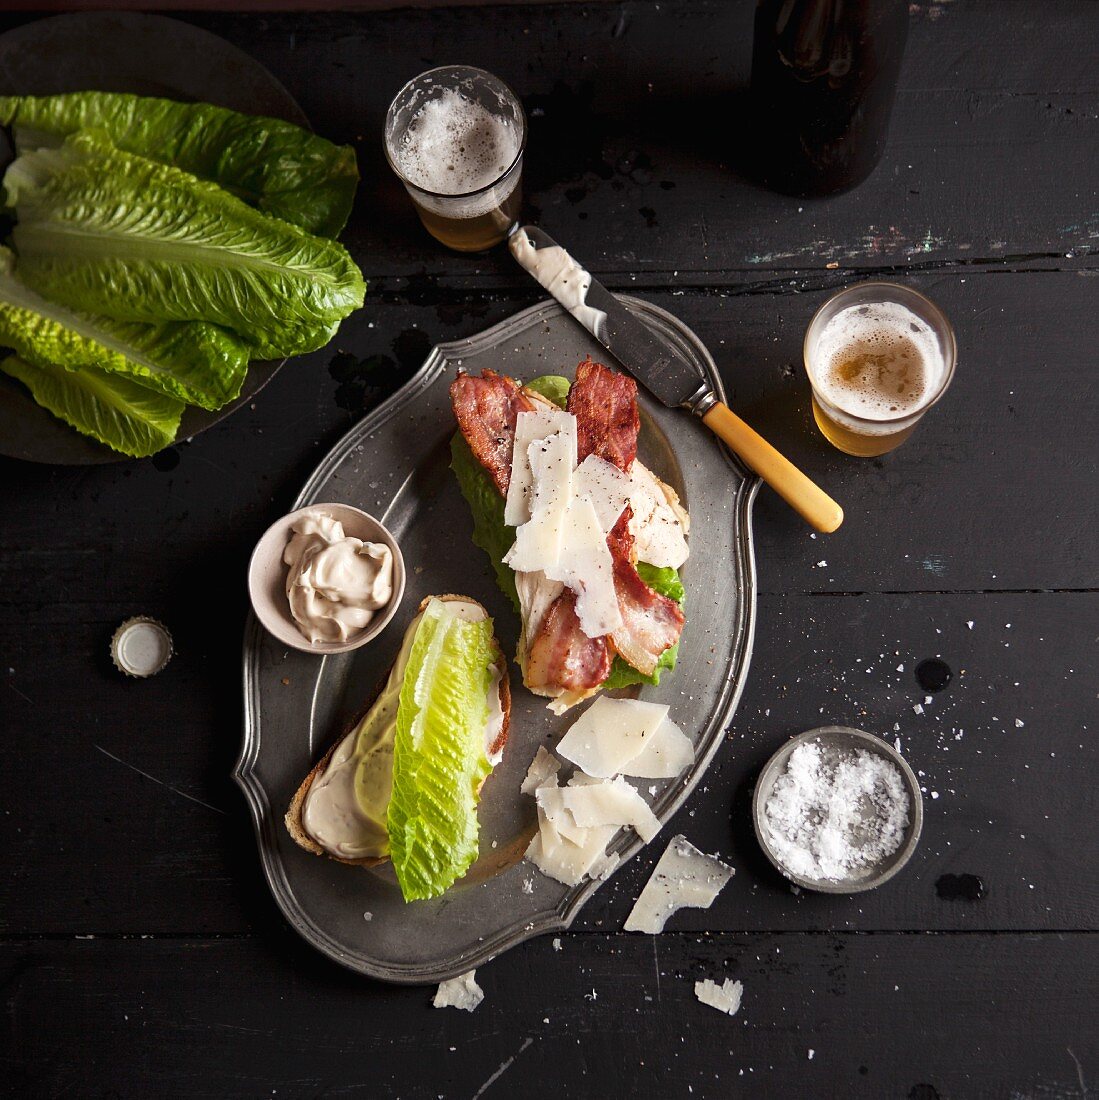 A club sandwich with lettuce, bacon and Parmesan